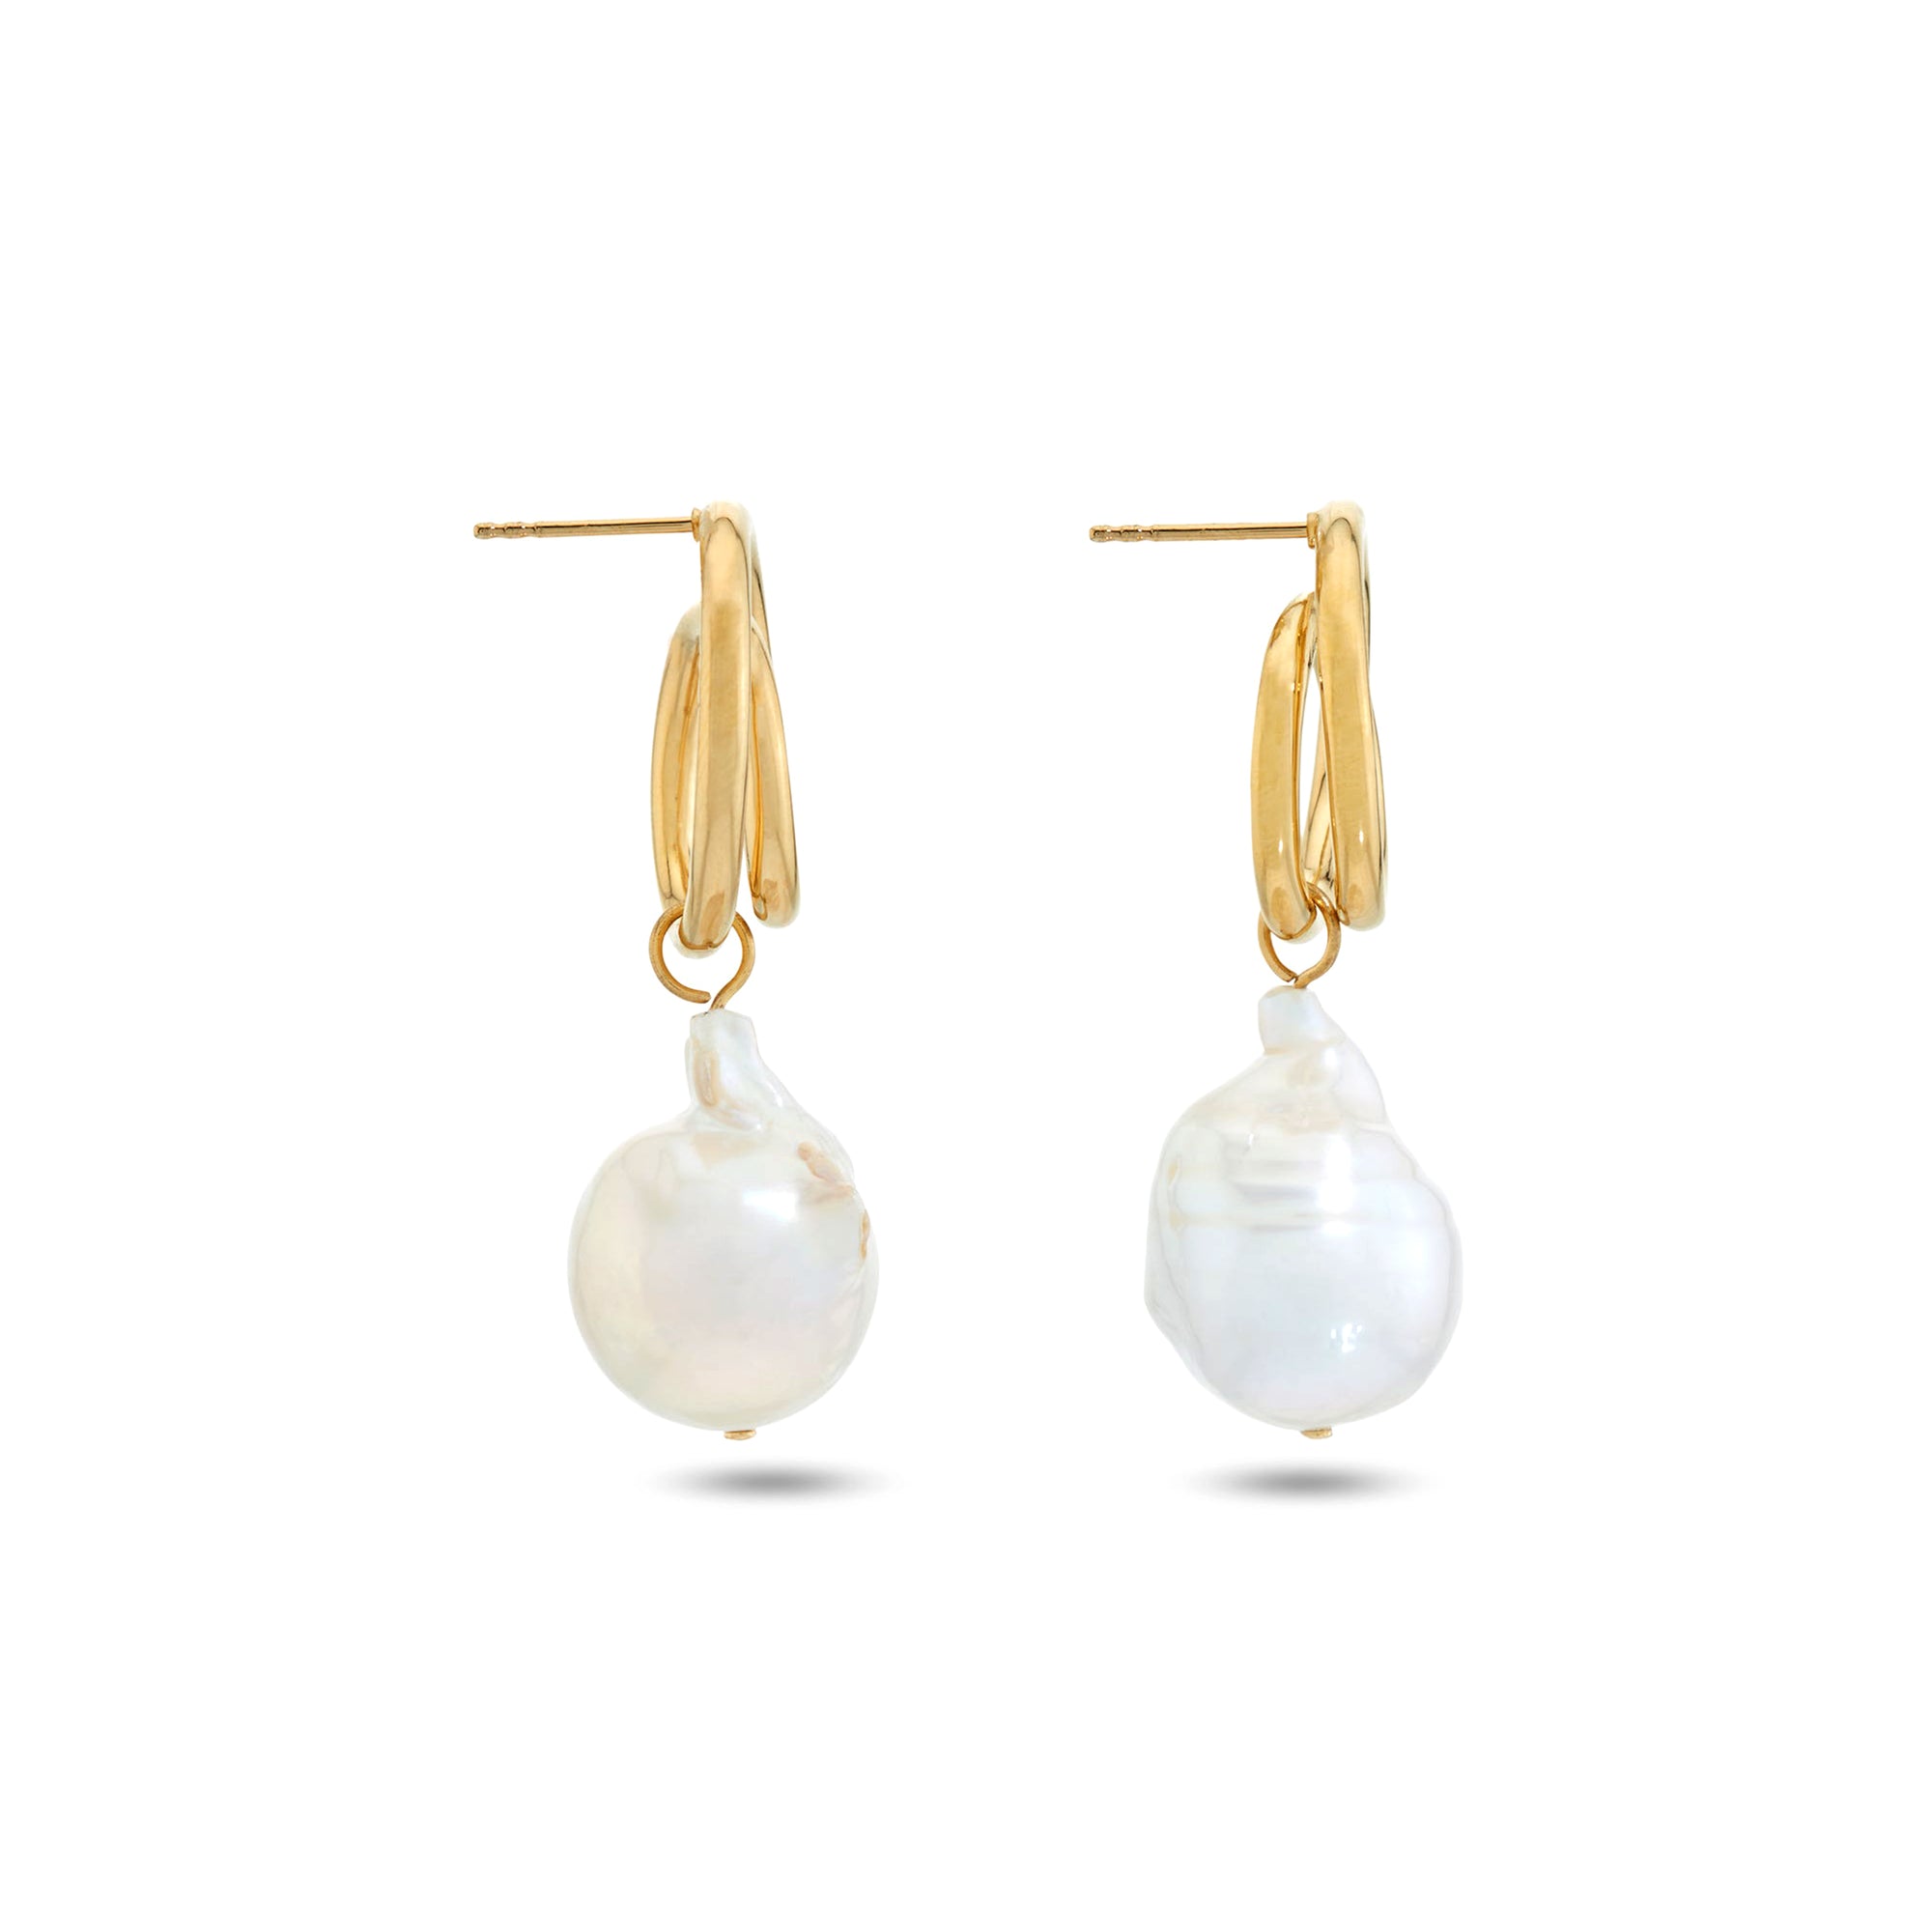 Completedworks - Spiral Earrings with Fresh Water Pearls view 3